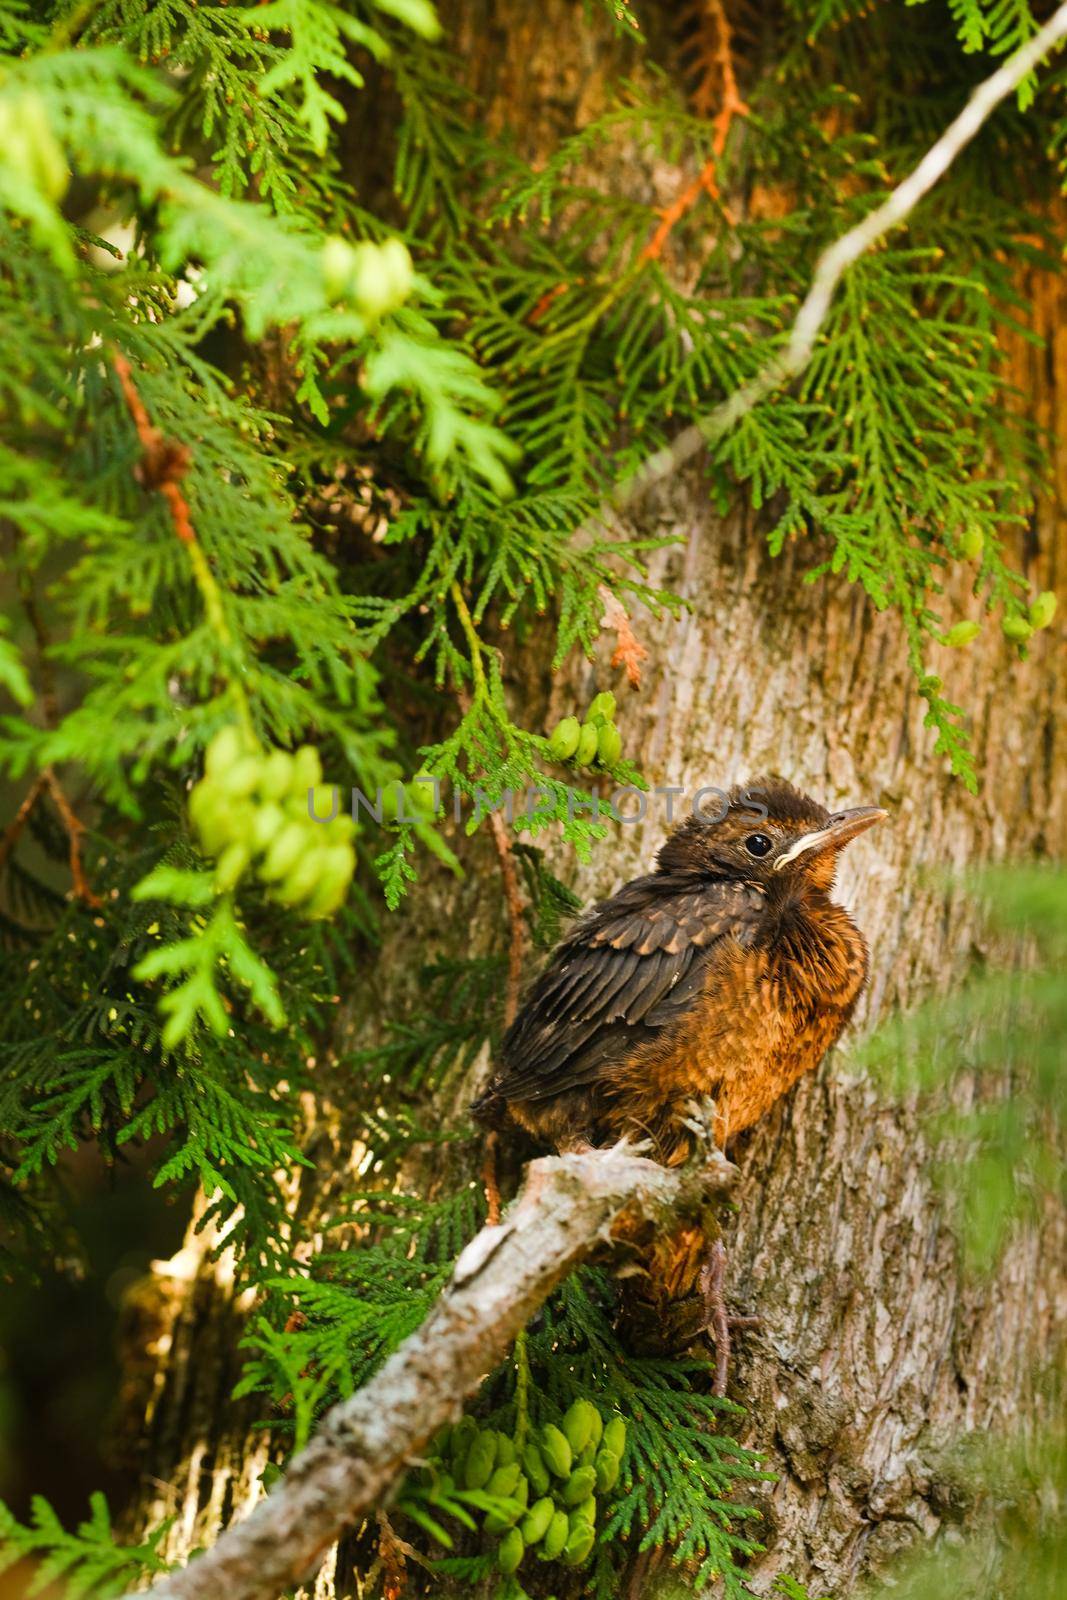 A thrush chick is sitting on a tree branch. The bird is a small blackbird sitting on the tree.